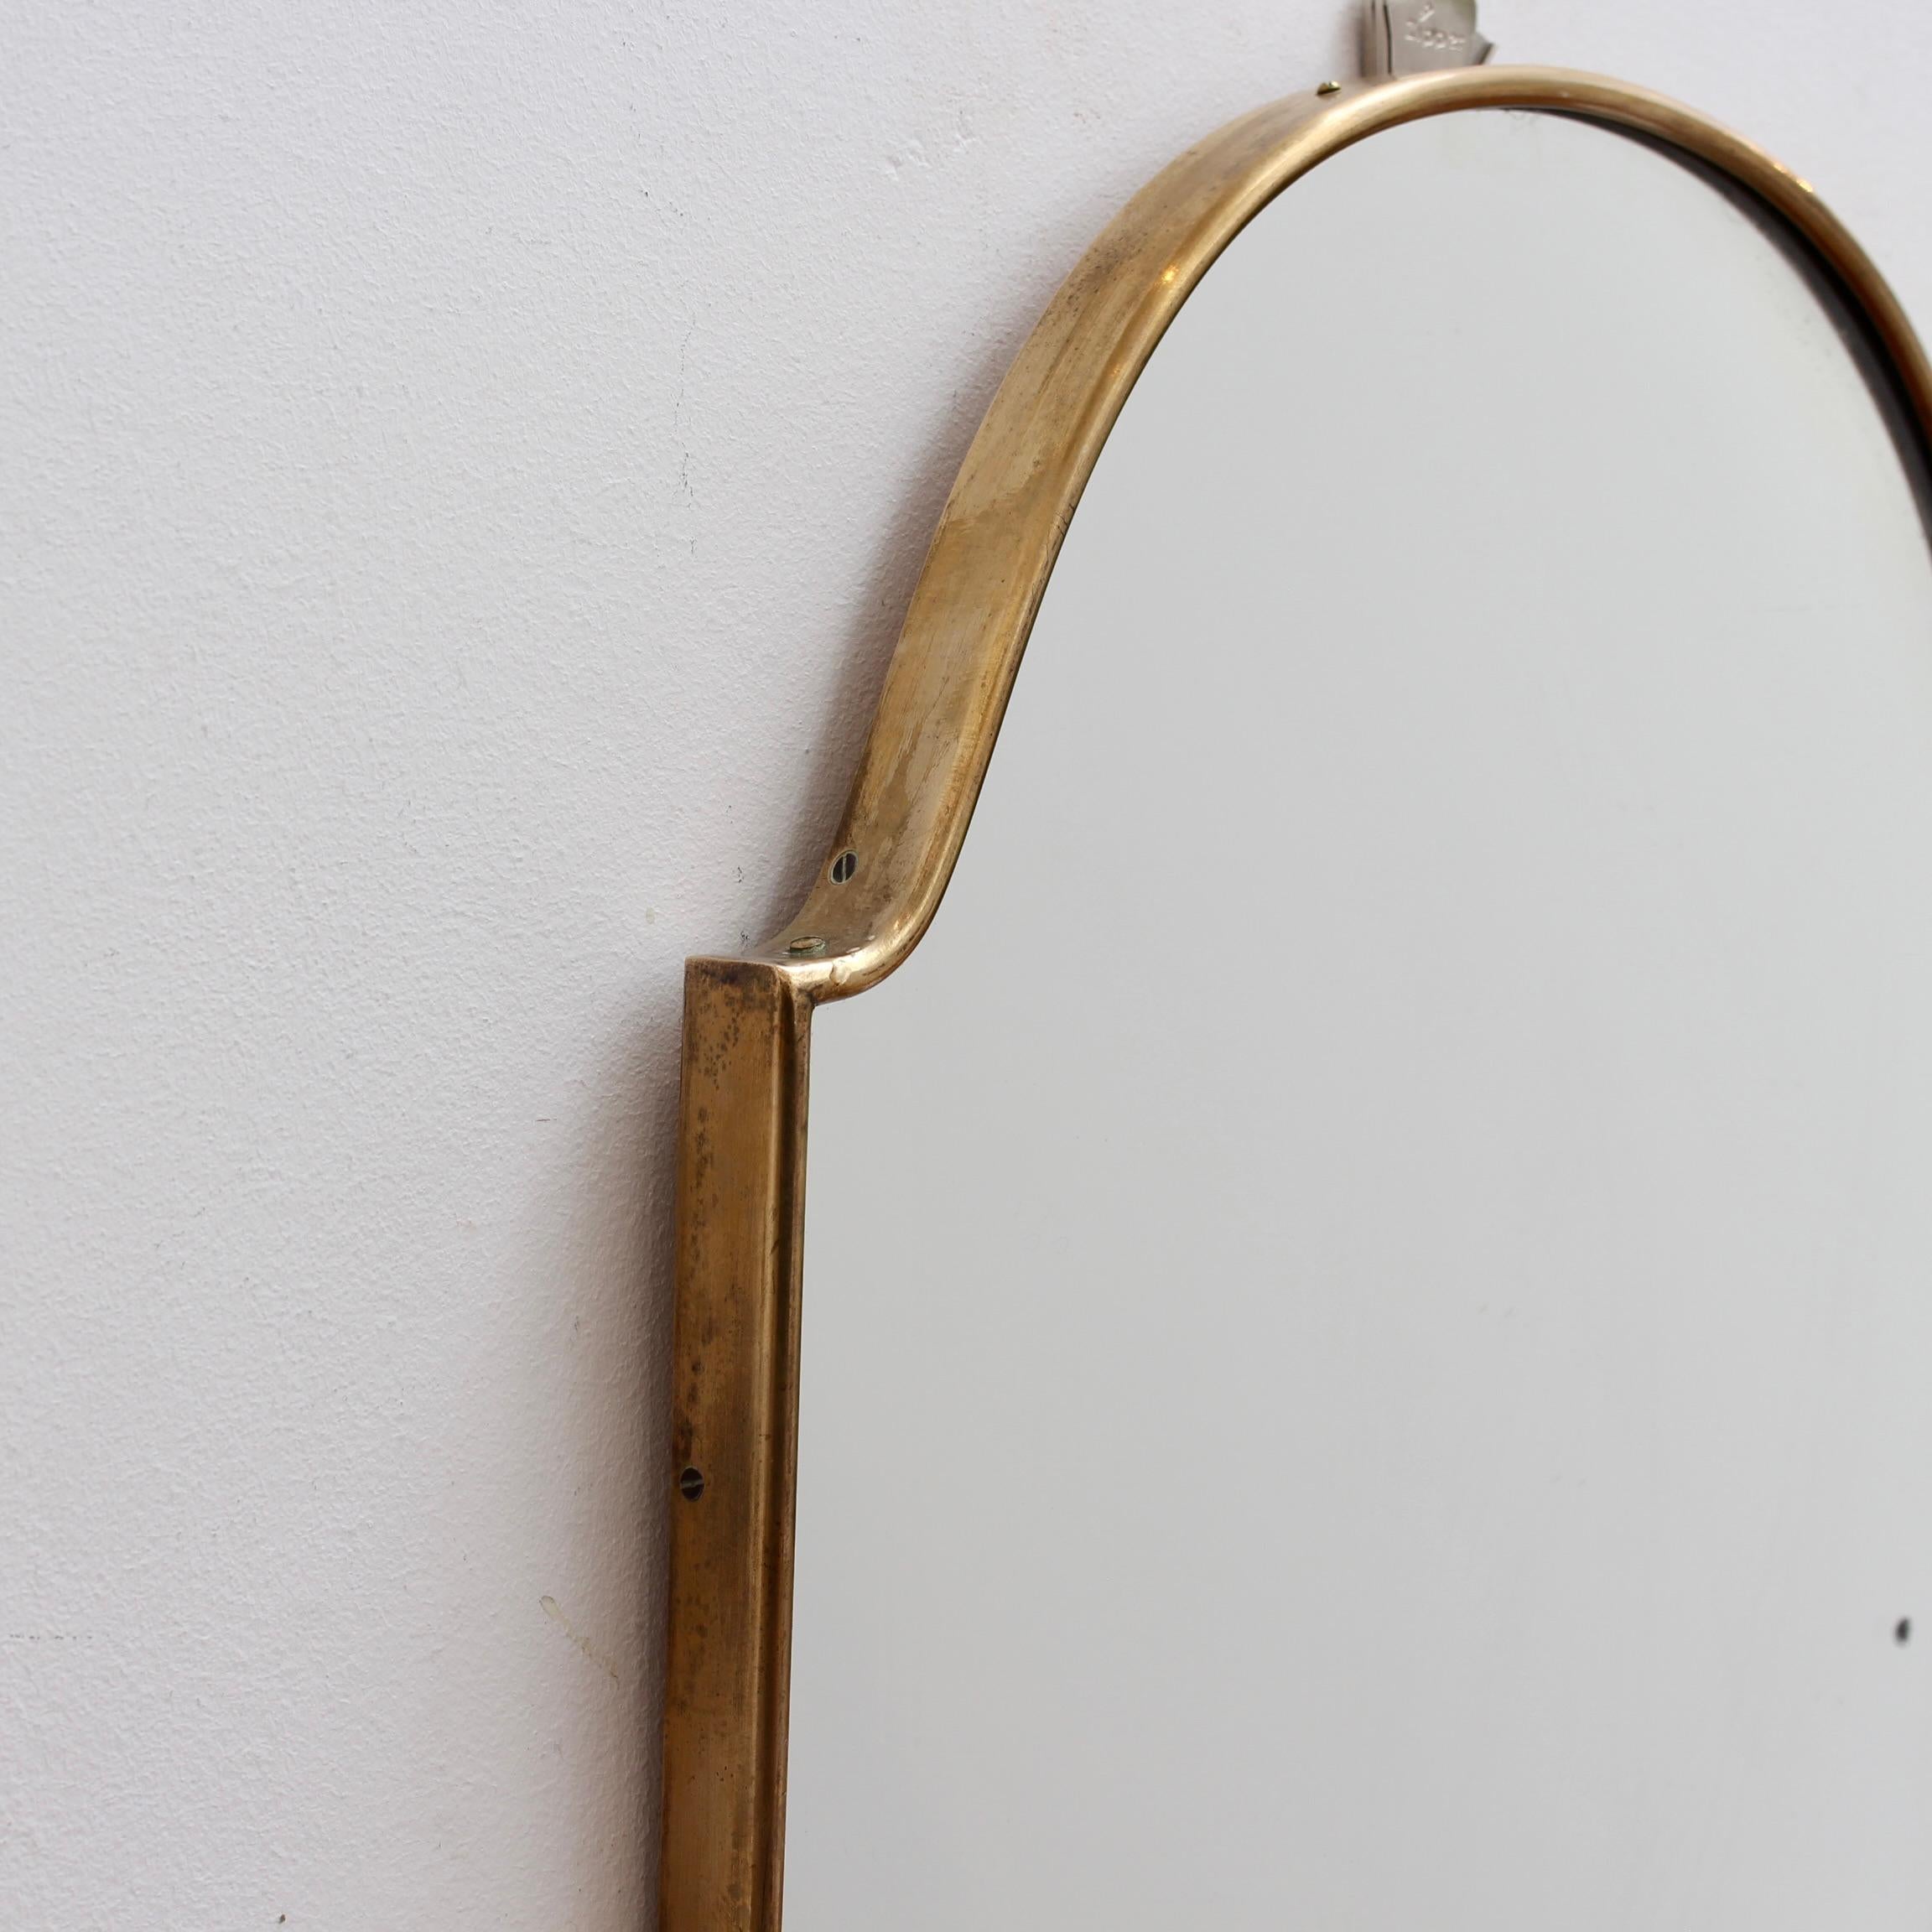 Vintage Italian Wall Mirror with Brass Frame (circa 1950s) - Small In Good Condition For Sale In London, GB